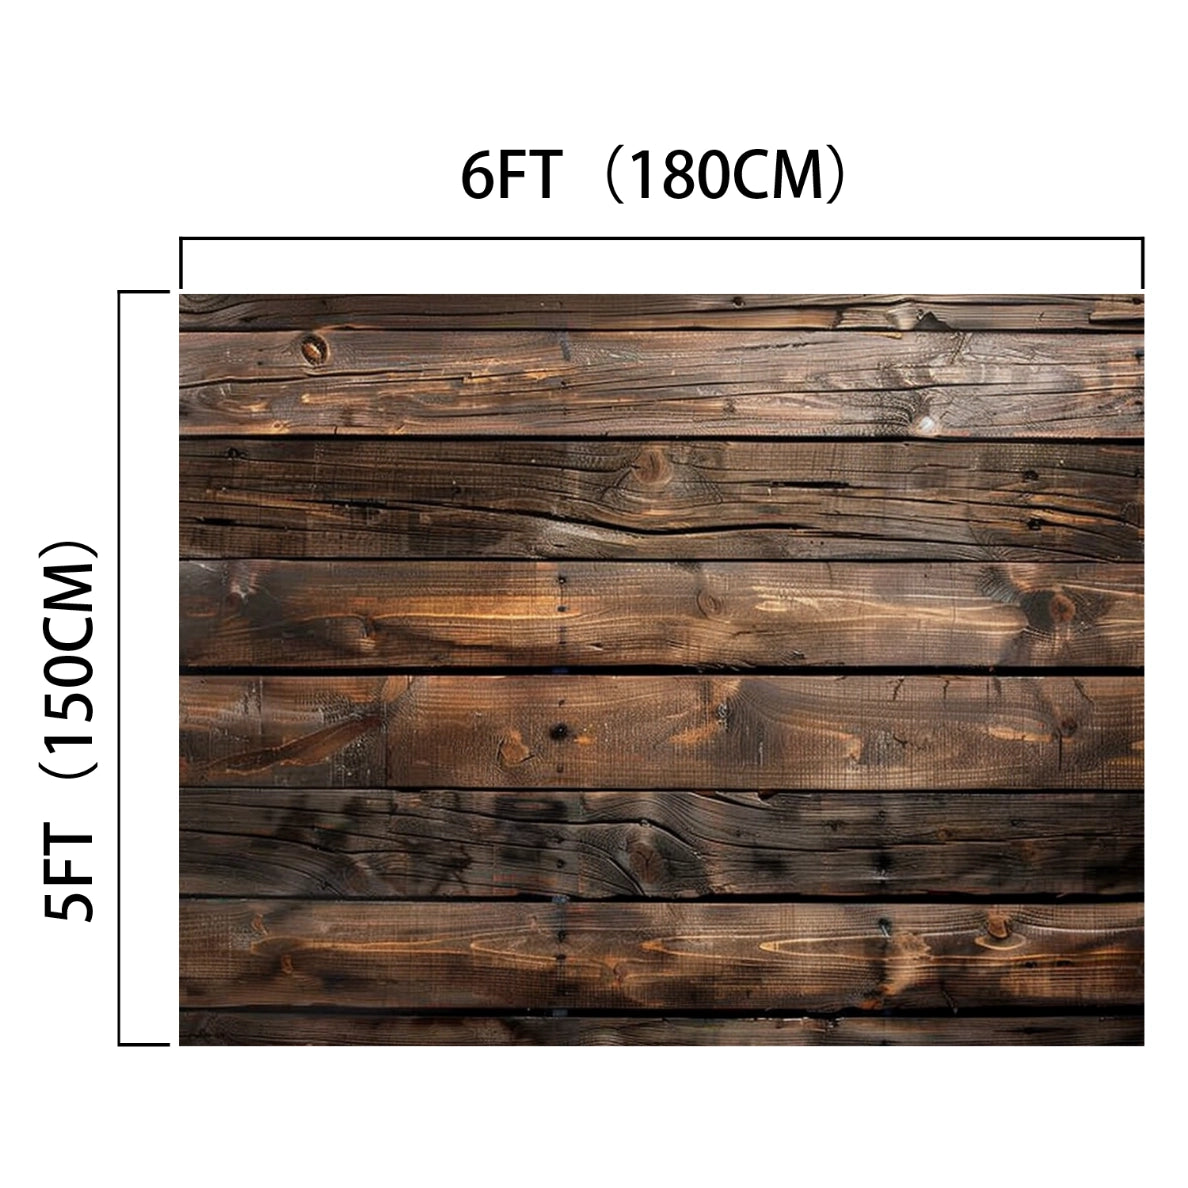 A 6-foot by 5-foot wood wall backdrop with a brown wooden plank design, dimensions clearly marked as 180 cm by 150 cm. Ideal for photography props, it features notable wrinkle resistance. Product Name: Brown Wood Backdrop Photographers for Birthday Baby Shower Background Photo Booth Video Shoot Studio Prop by Brand Name: ideasbackdrop.